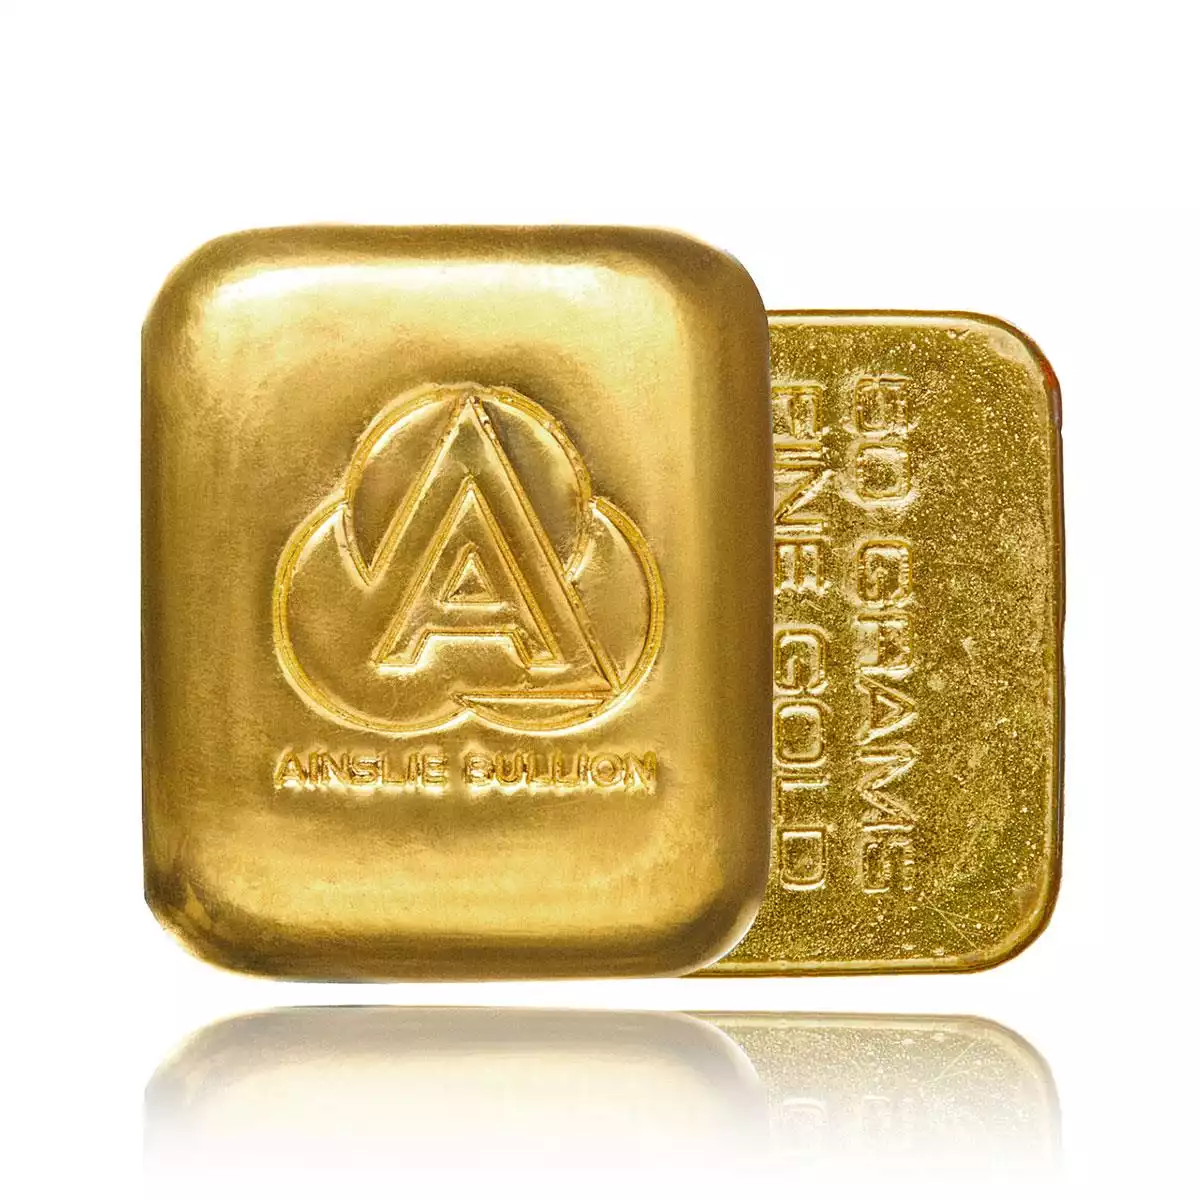 the 50g ainslie gold bullion 1.6 troy oz providing a discount per oz to a 1oz bar whilst maintaining excellent portability with their compact size. th...